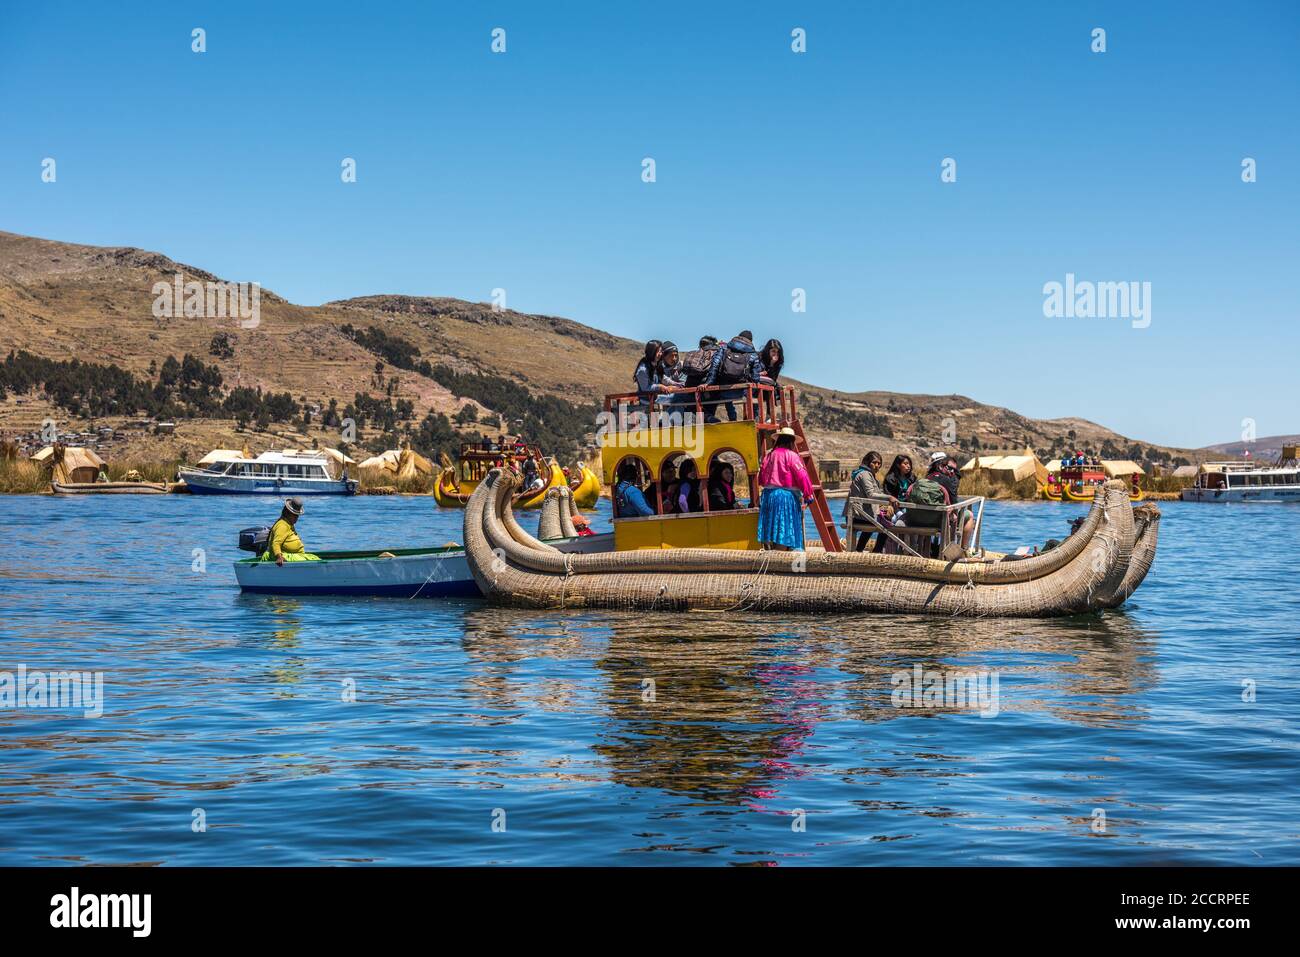 Puno, Peru - October, 9, 2015: Tourists on the reed boat, Uros floating islands of lake Titicaca, Peru, South America Stock Photo